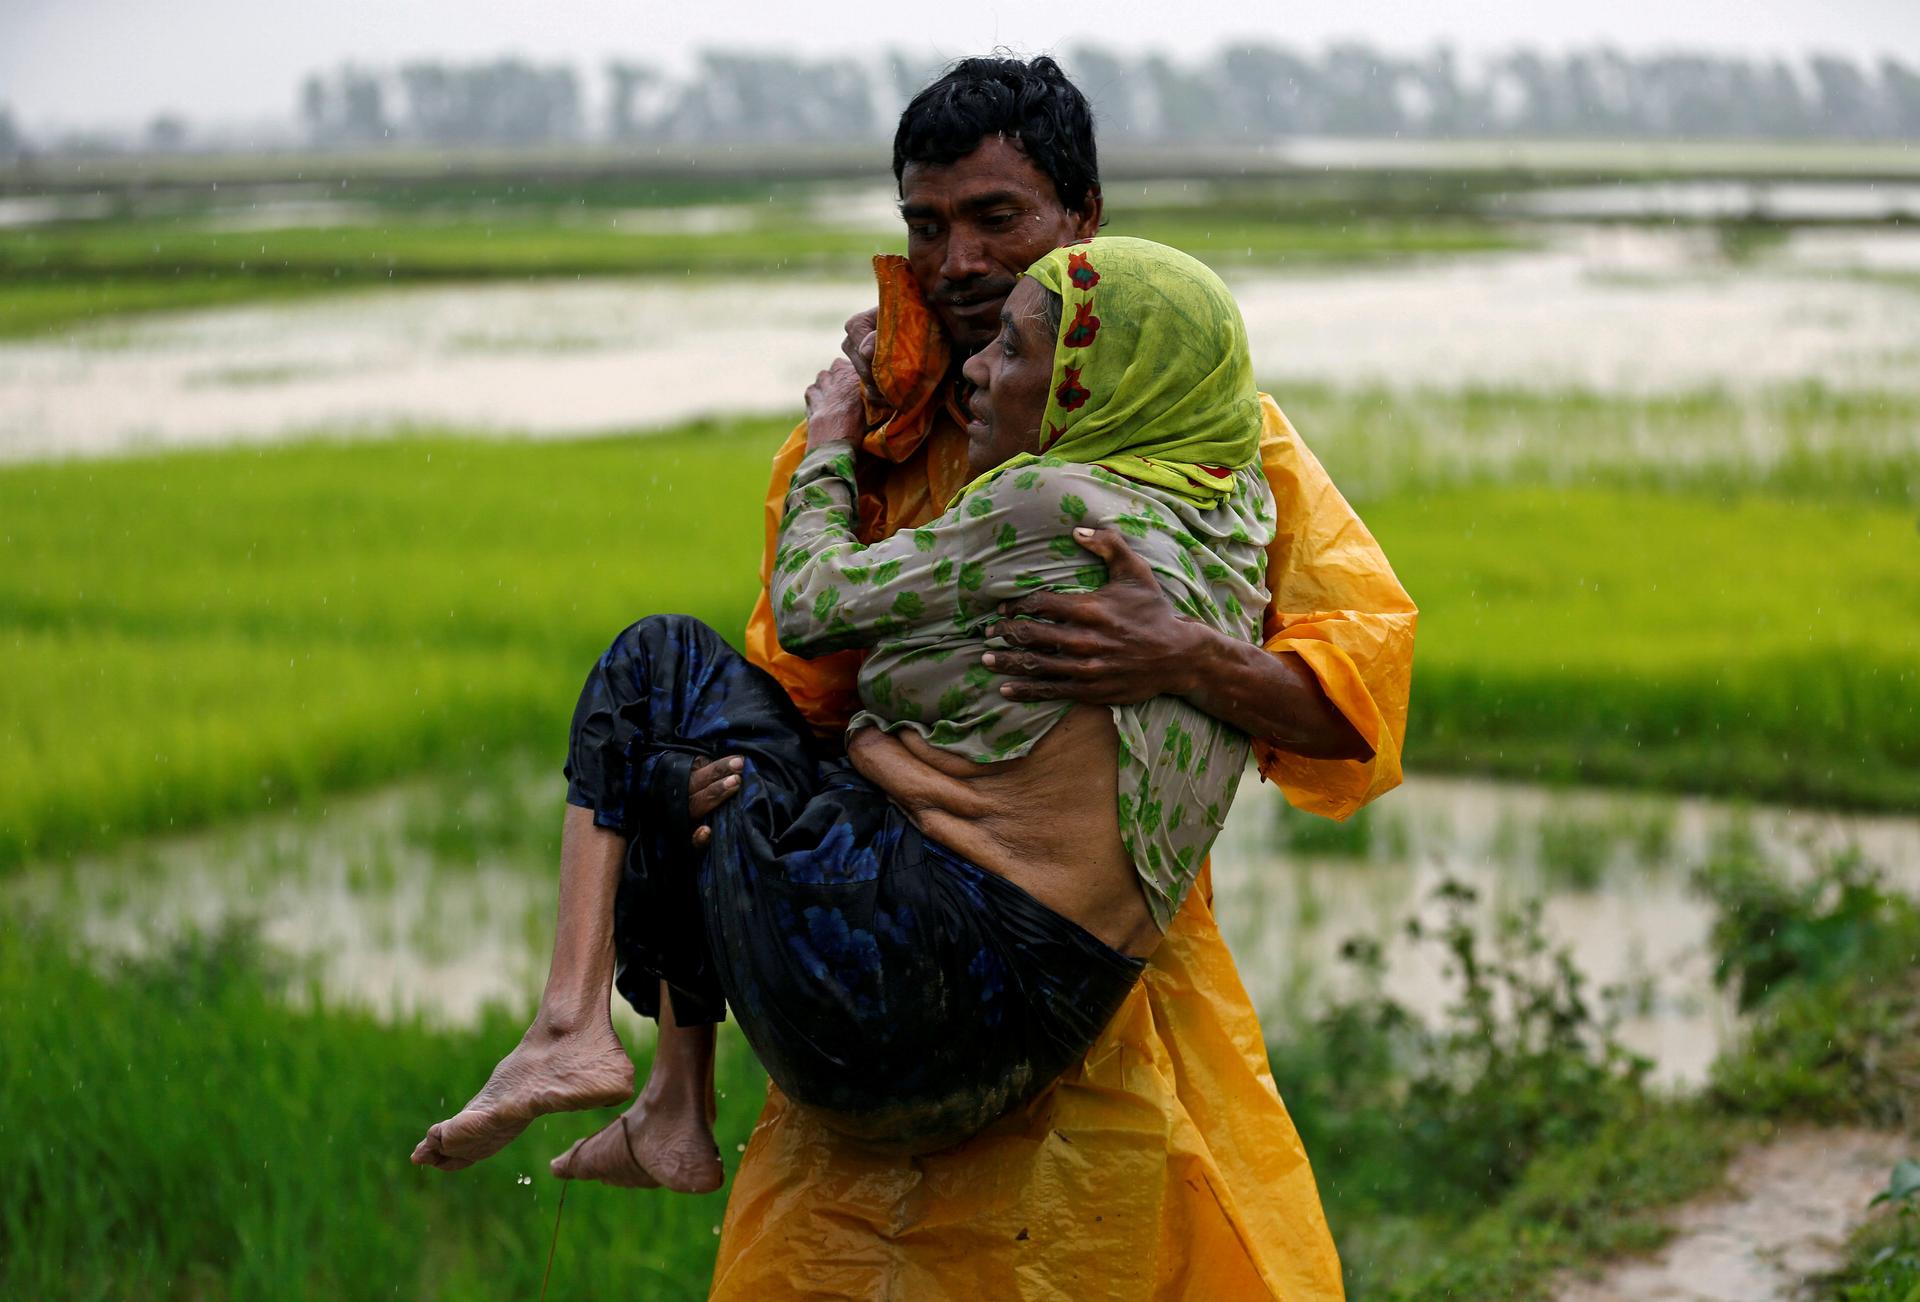 A local man in Teknaf, Bangladesh, carries an elderly Rohingya refugee woman as she is unable to walk after crossing the border from Myanmar